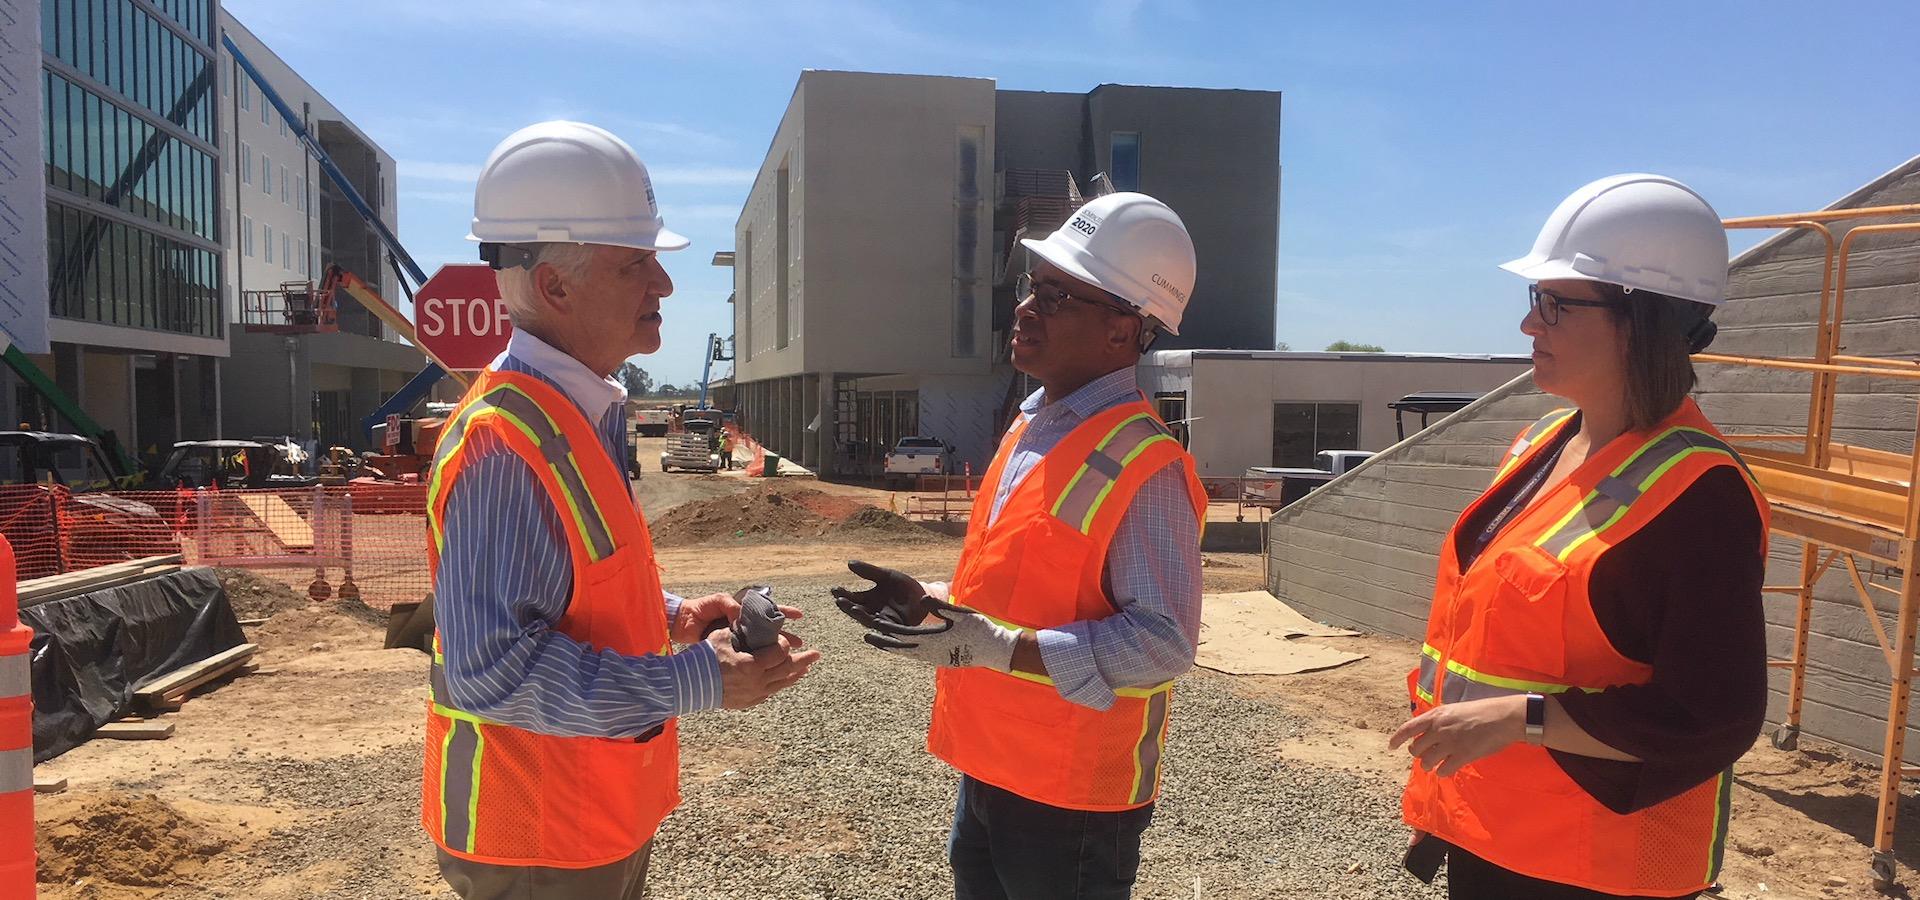 Rep. Costa speaking with people on a construction site